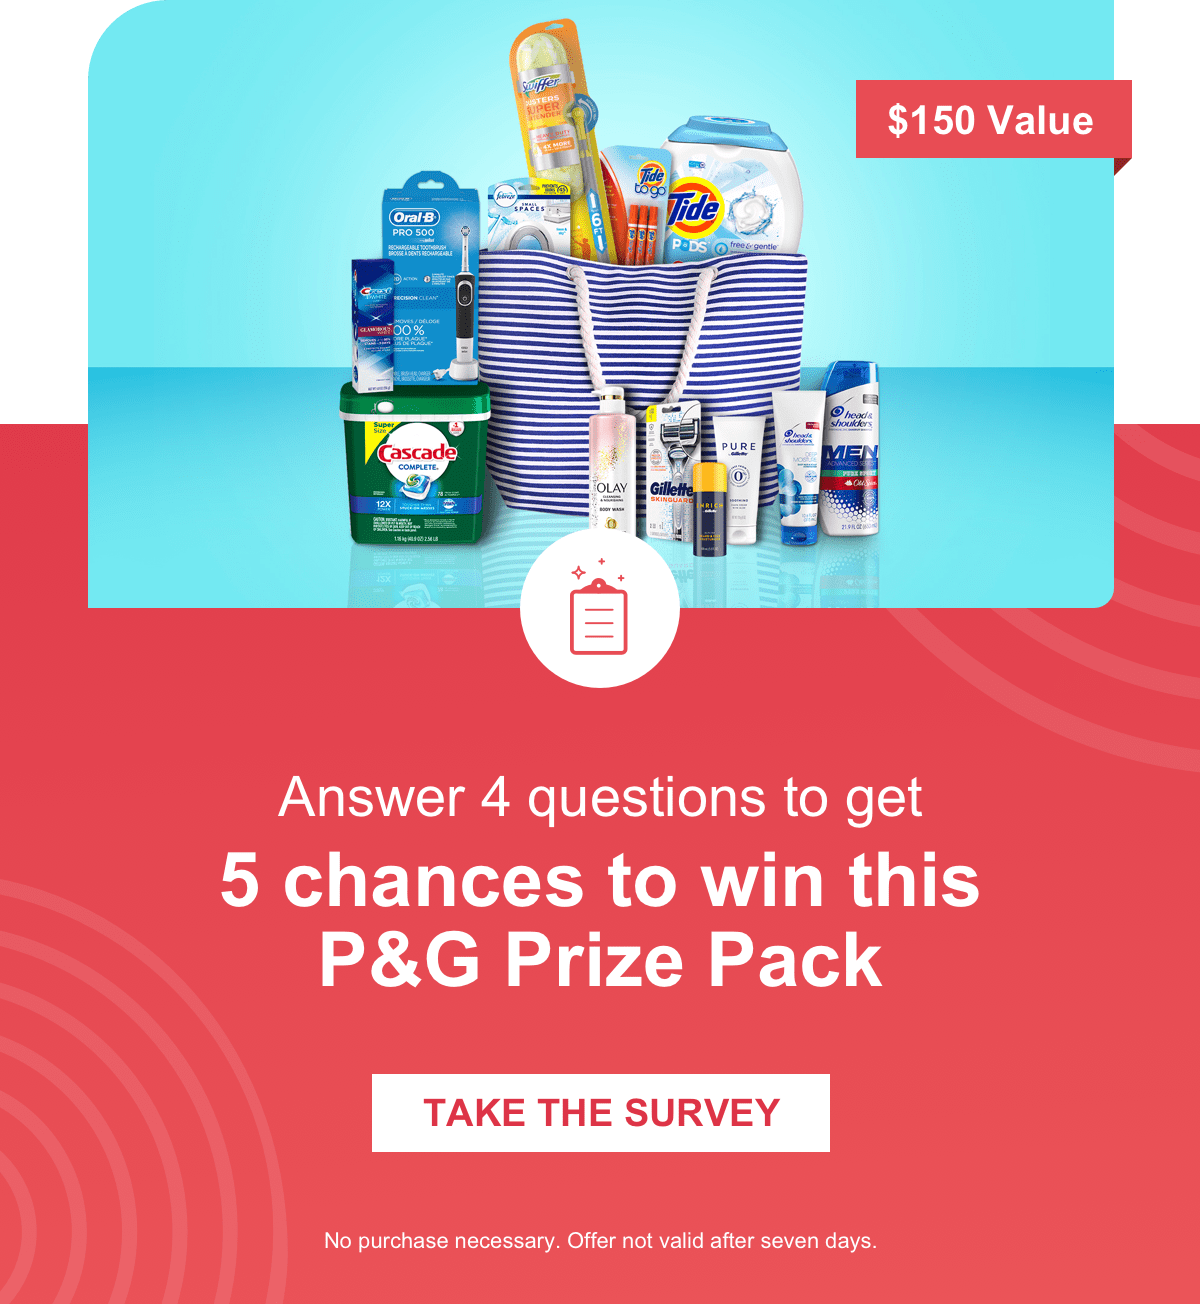 Answer 4 questions to get 5 chances to win this P&G Prize Pack